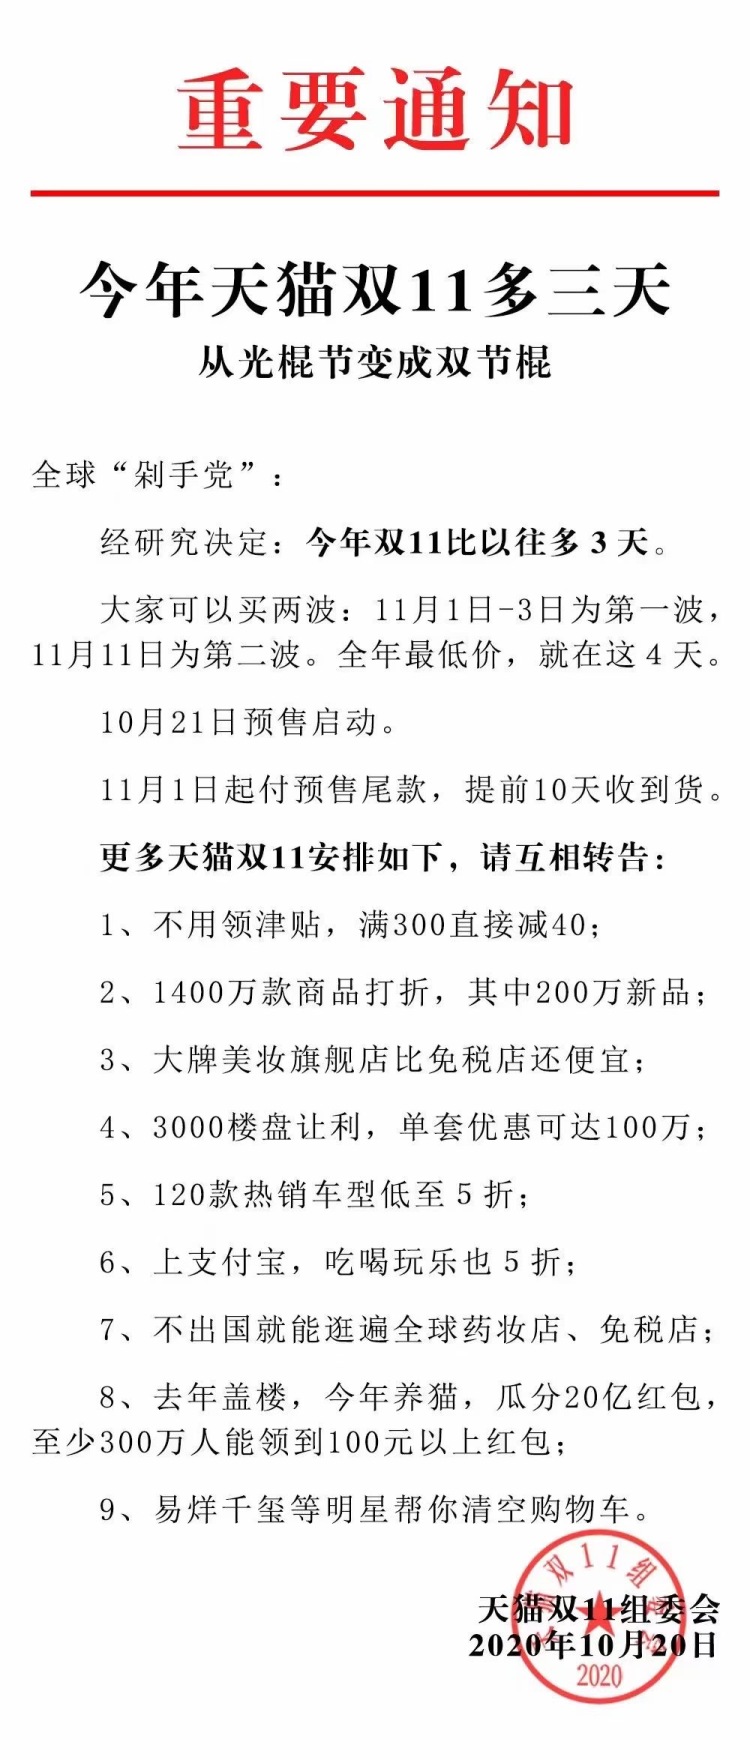 A list of all promotional details of this year's Double 11 from Alibaba in Chinese.